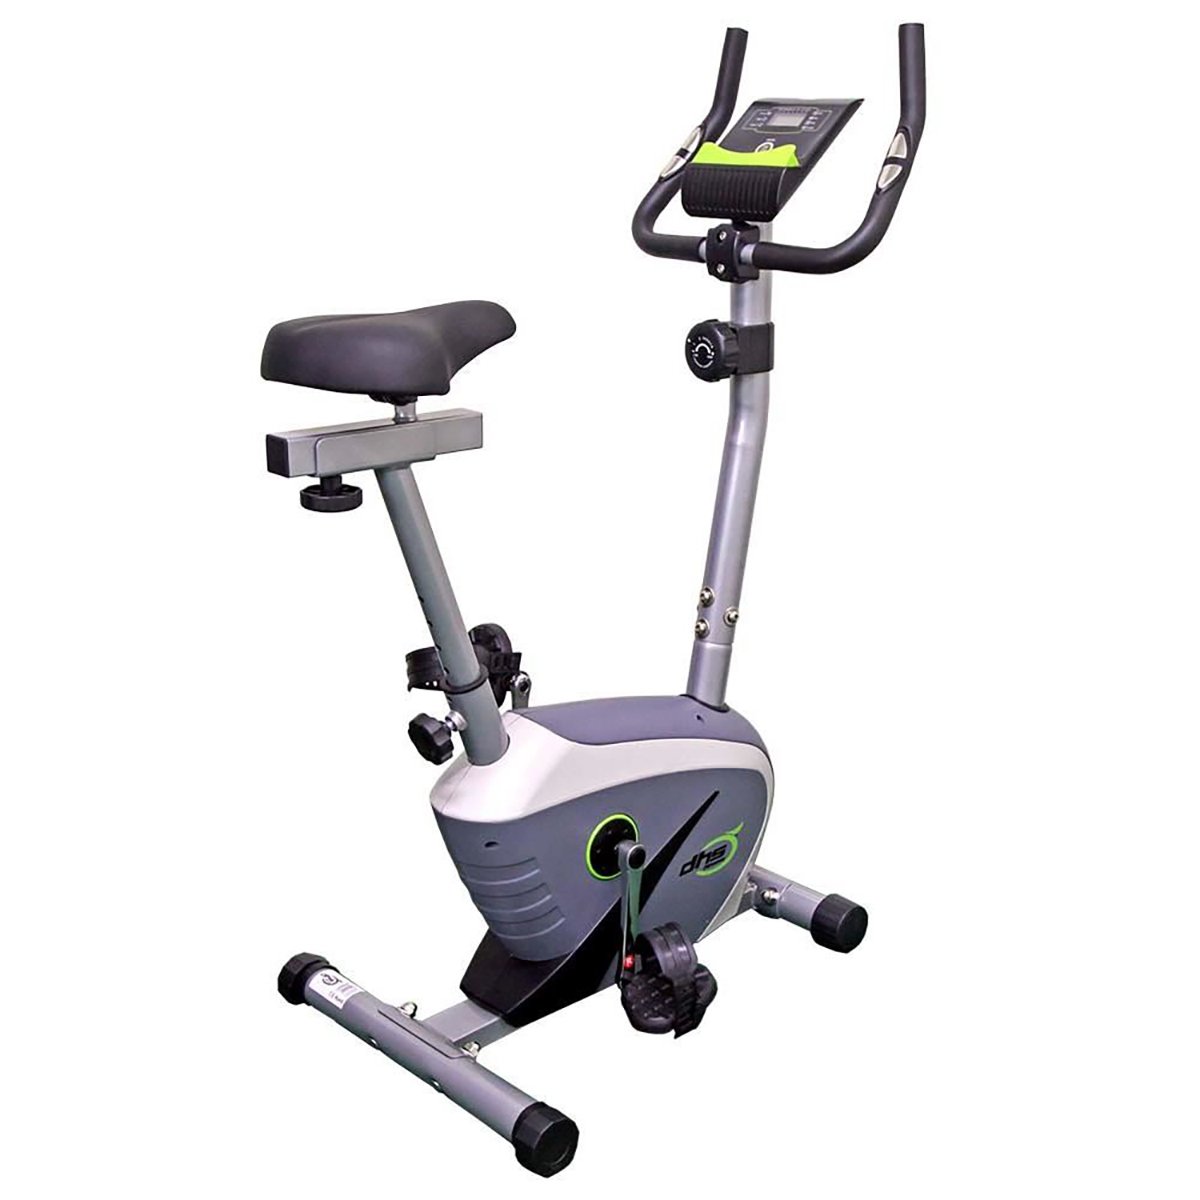 Bicicleta fitness magnetica DHS 2309 DHS imagine 2022